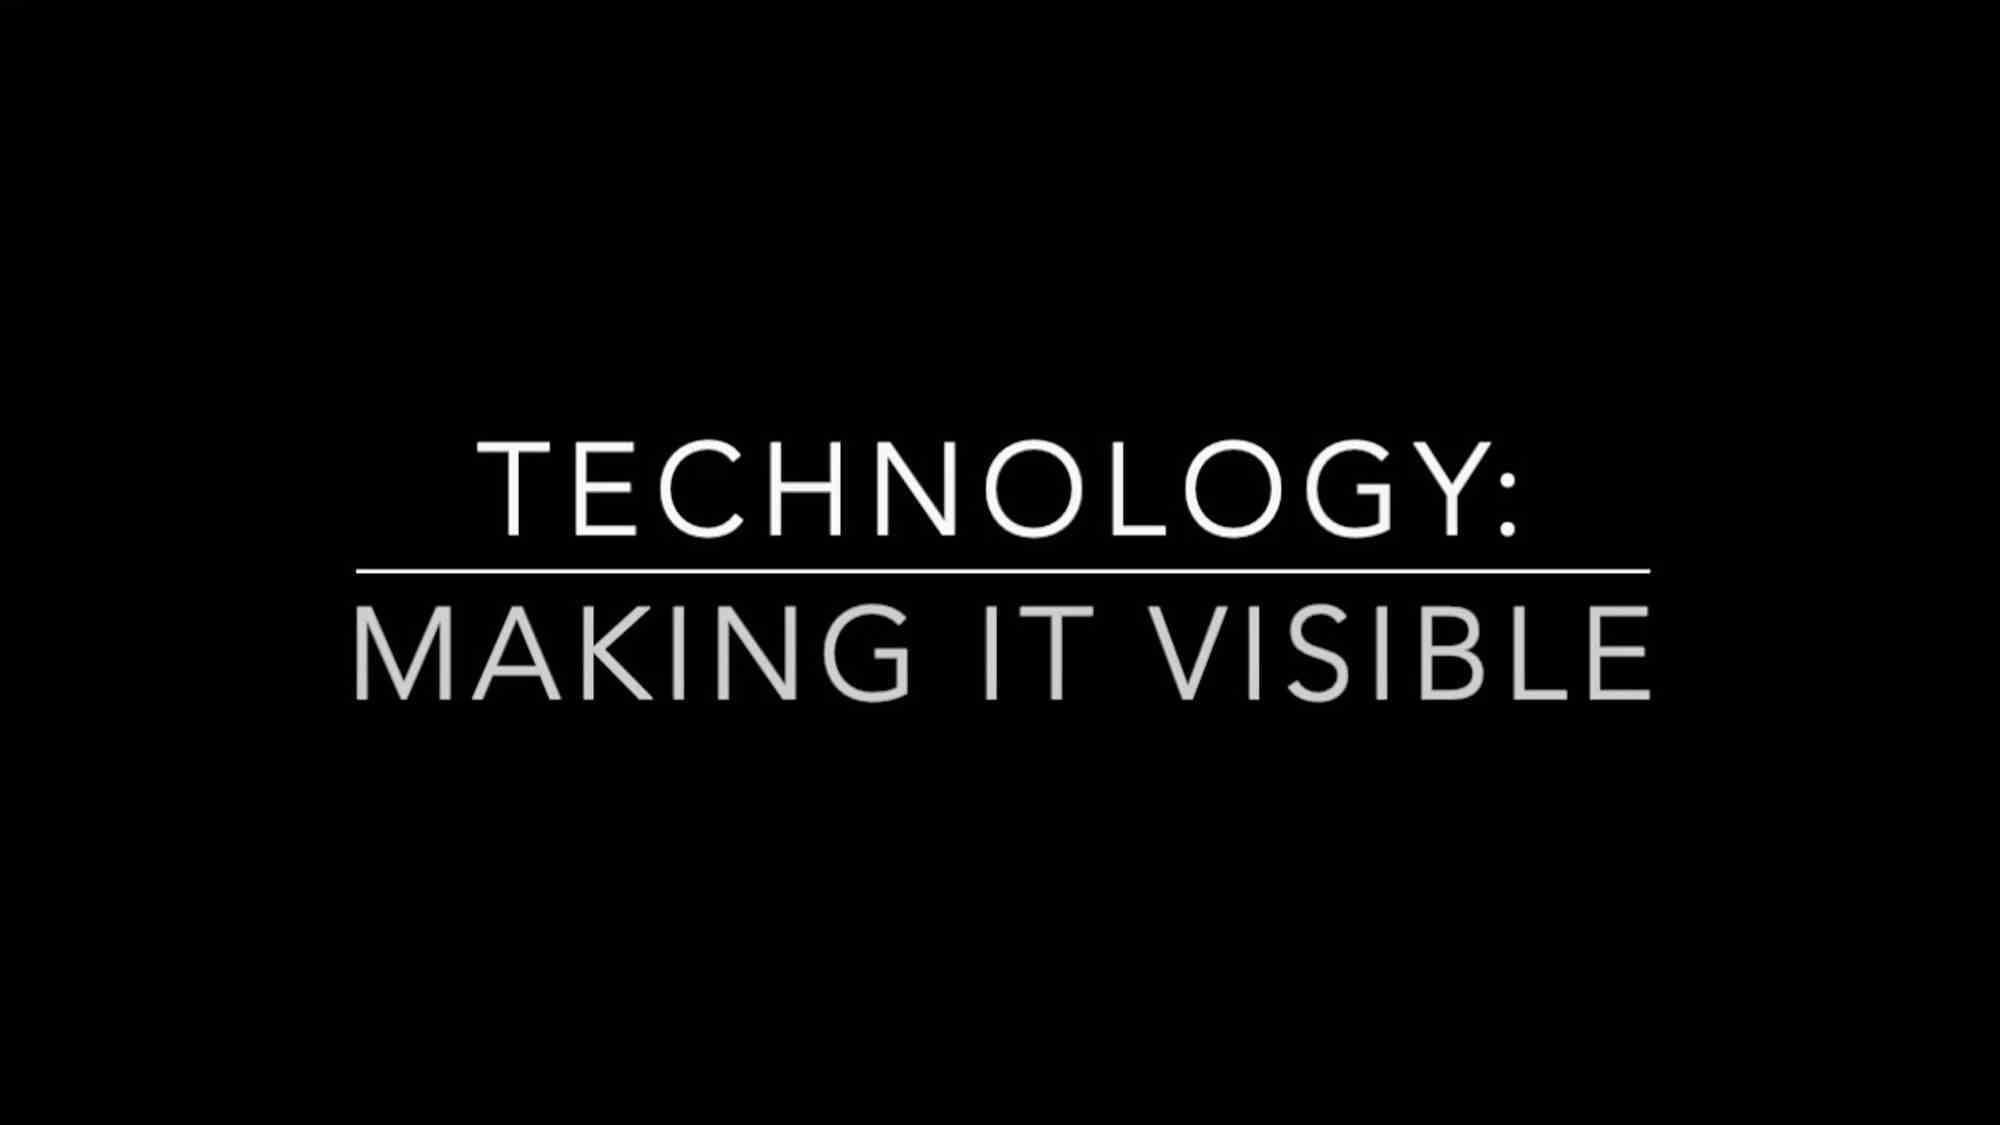 Therapy in 3 Minutes - Technology: Making it Visible